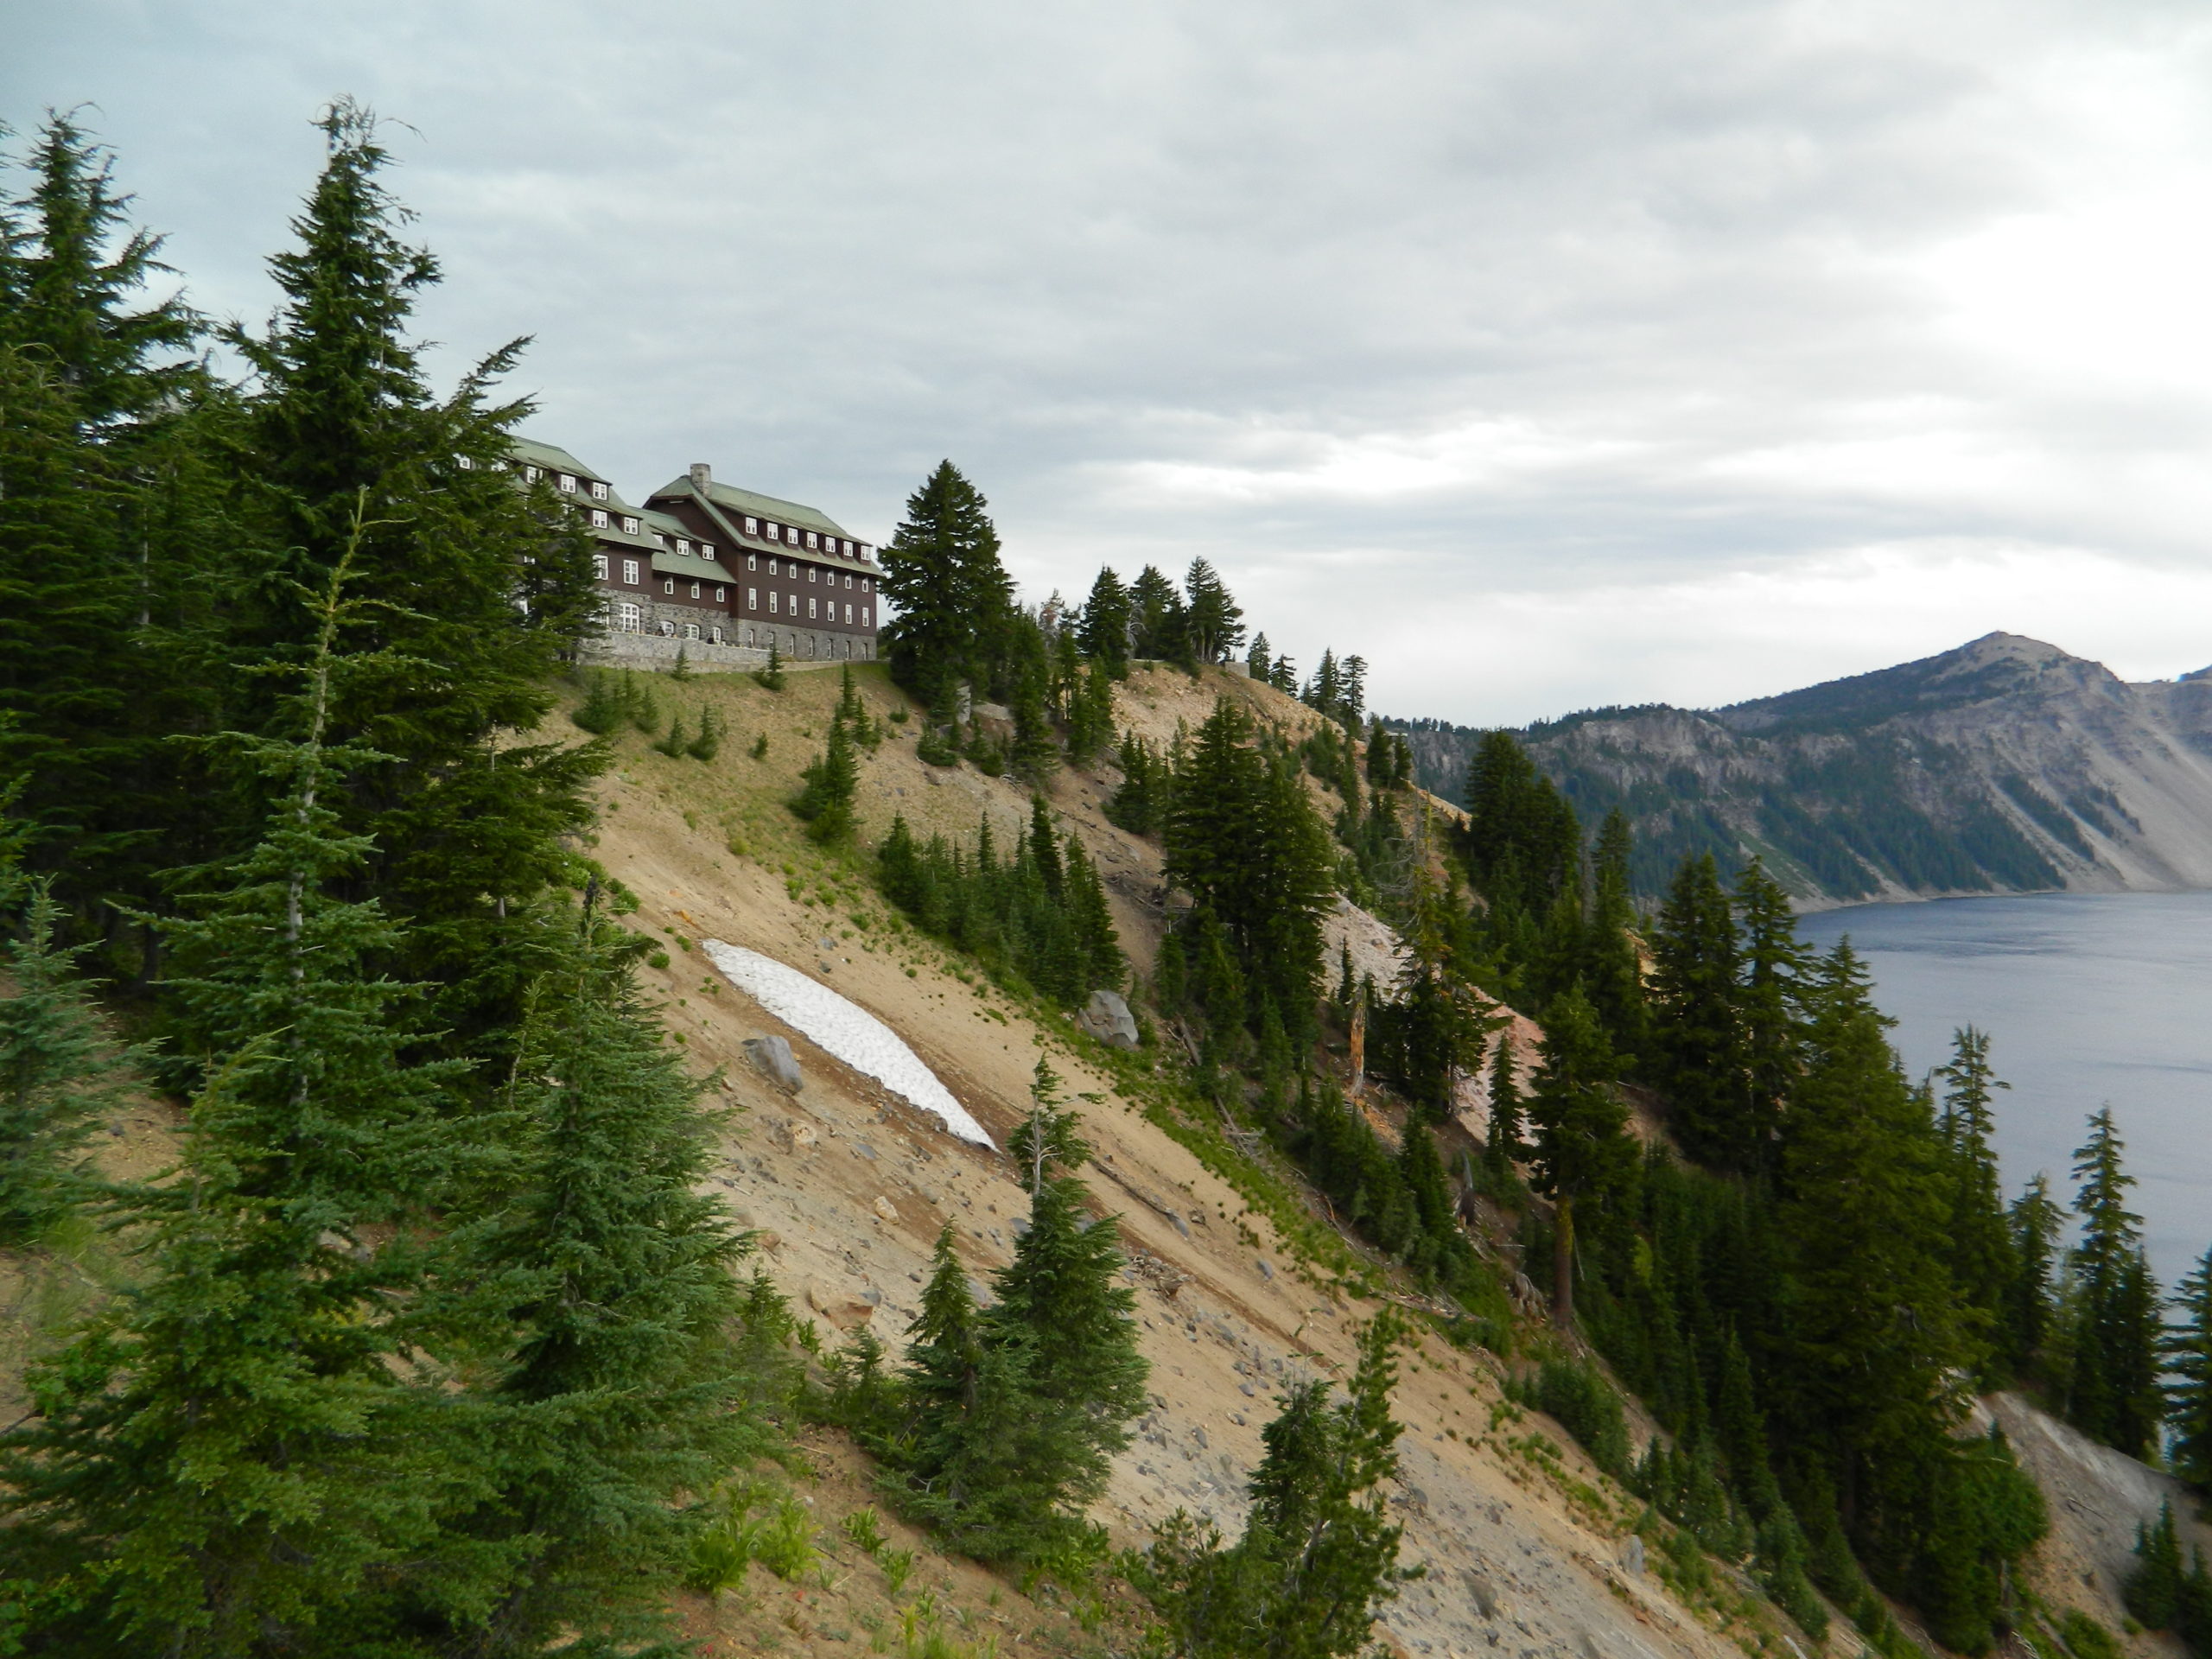 Crater Lake Lodge perched on the edge of the rim.